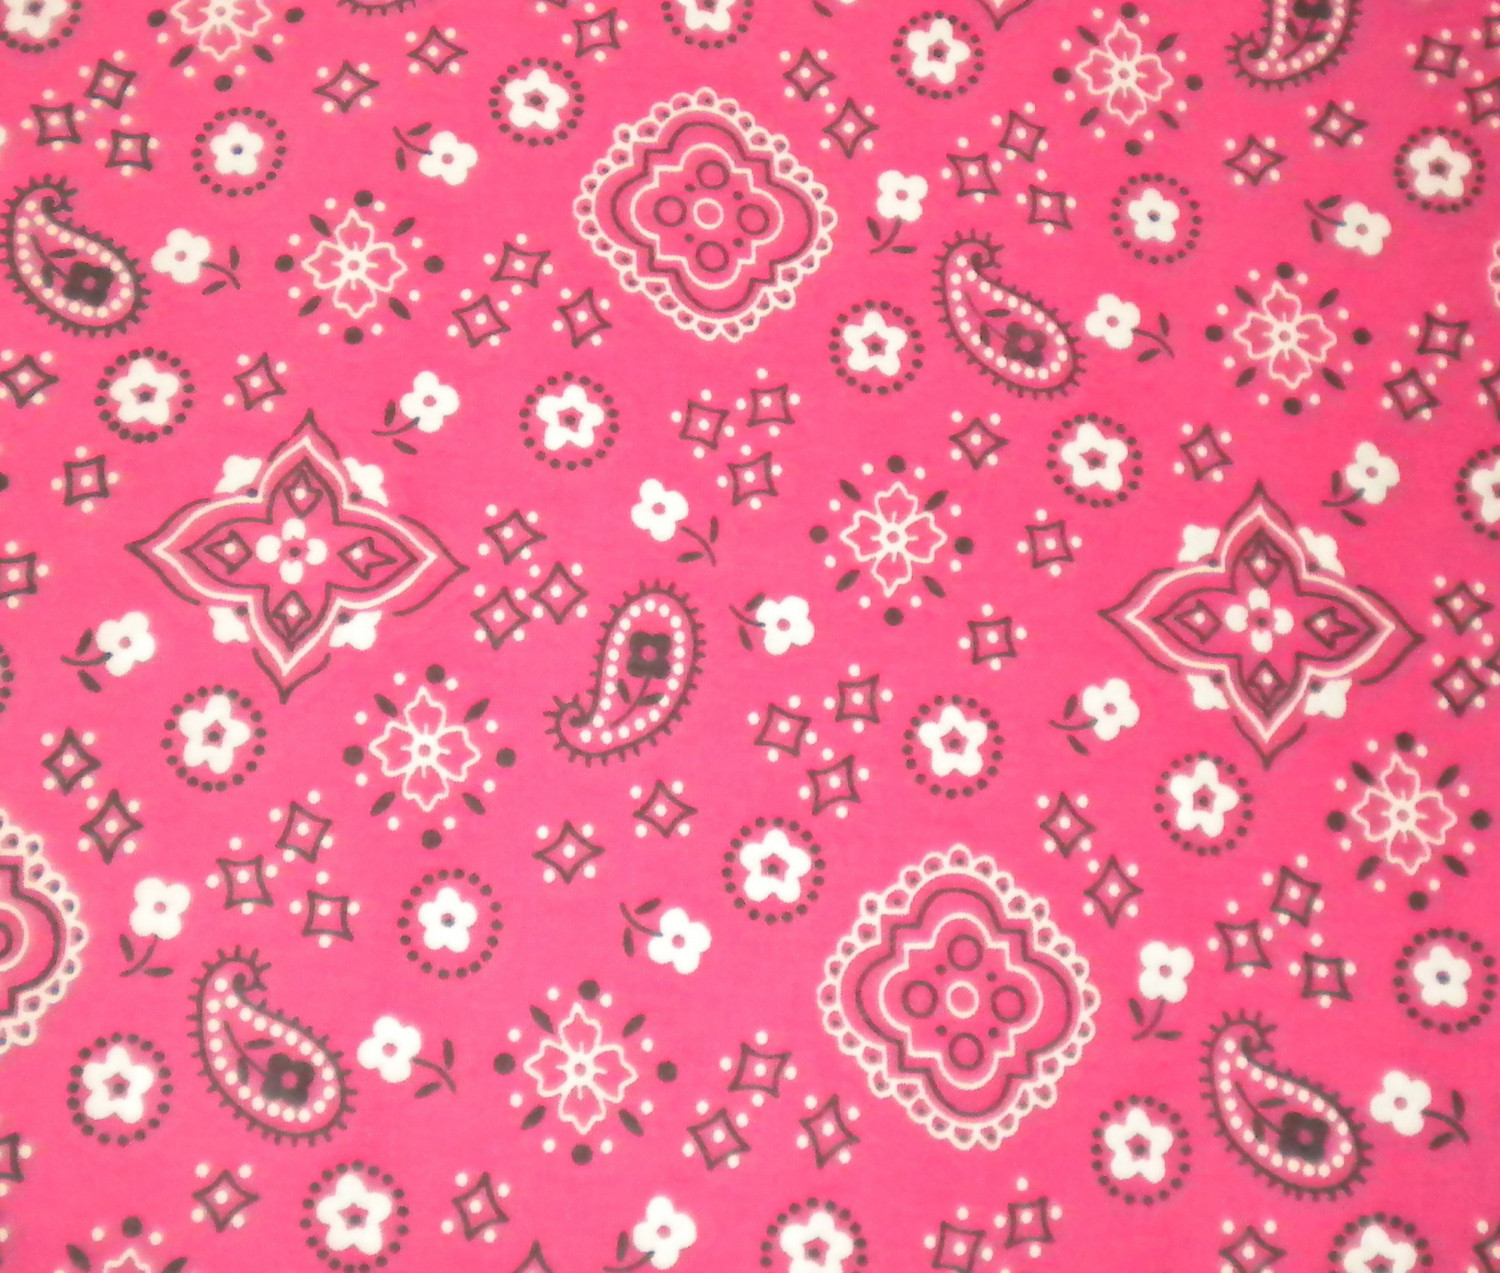 Pink Bandana Fabric Two Yards Uncut By Gothic61 On